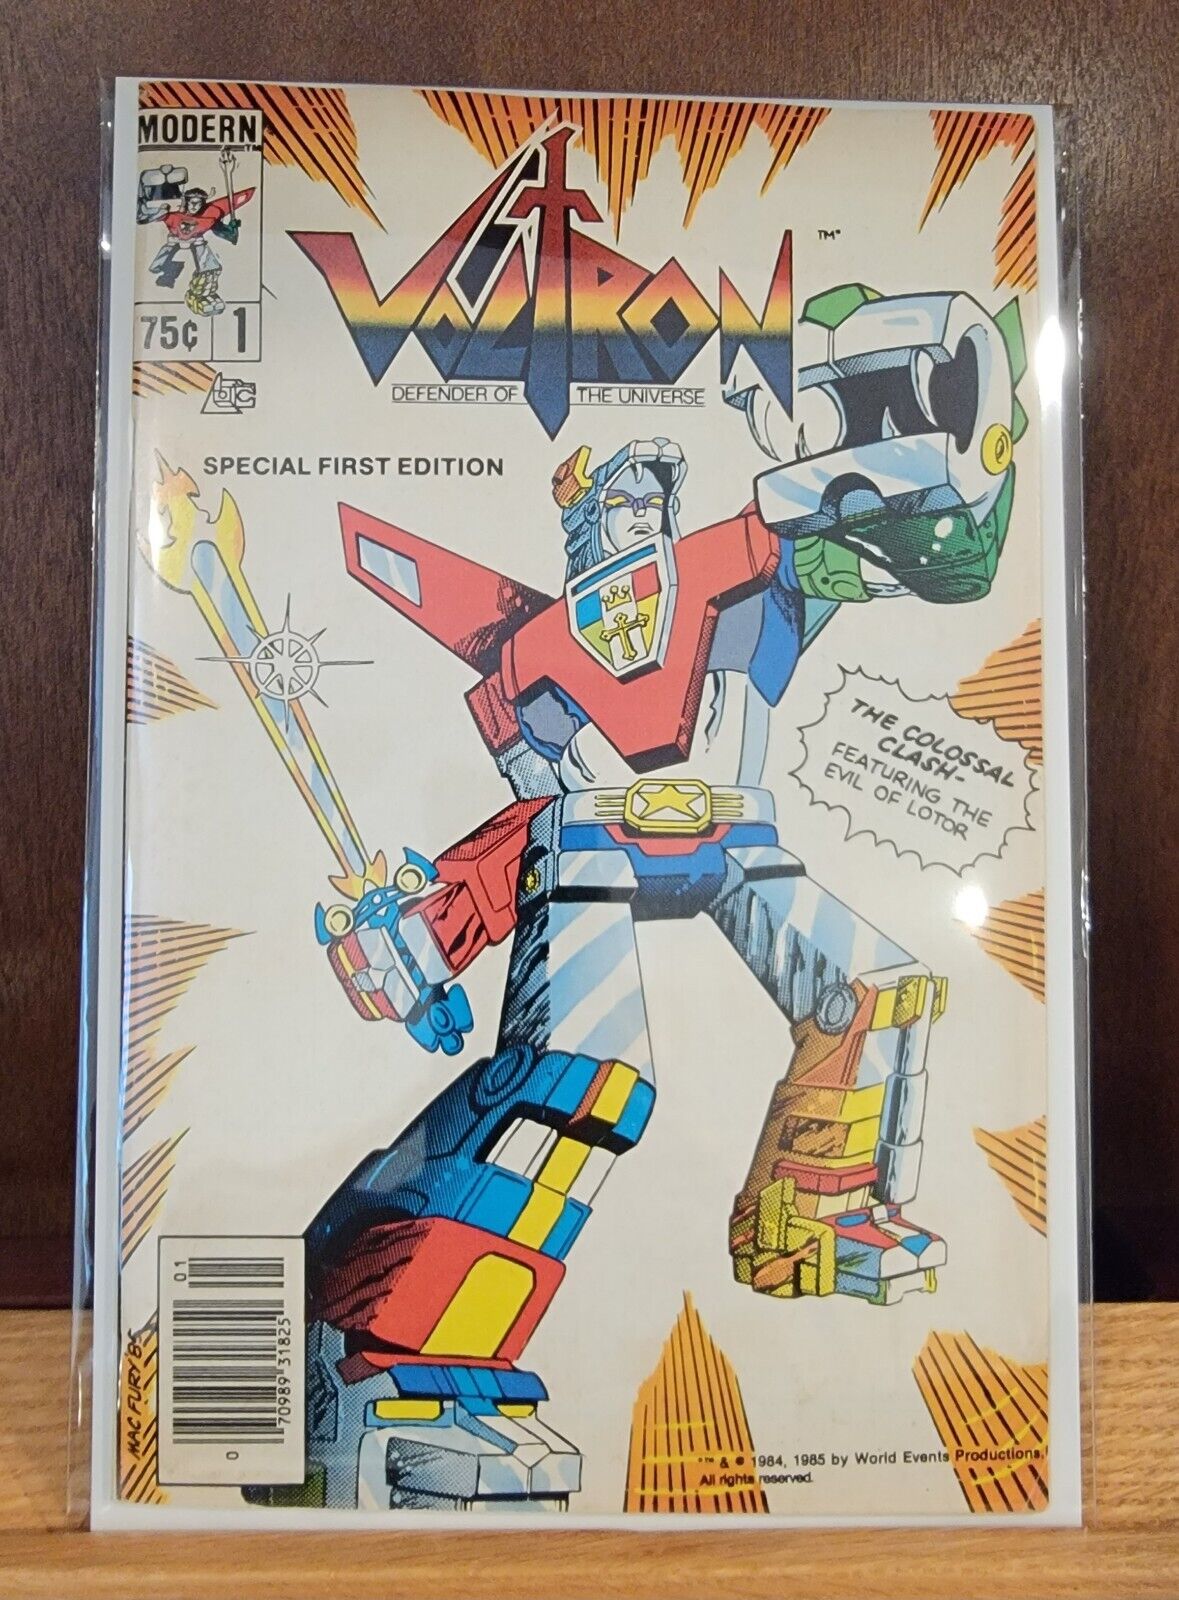 Voltron # 1 VF- 1st Appearance of Voltron in Comics, Newsstand 1985 Modern Pub.